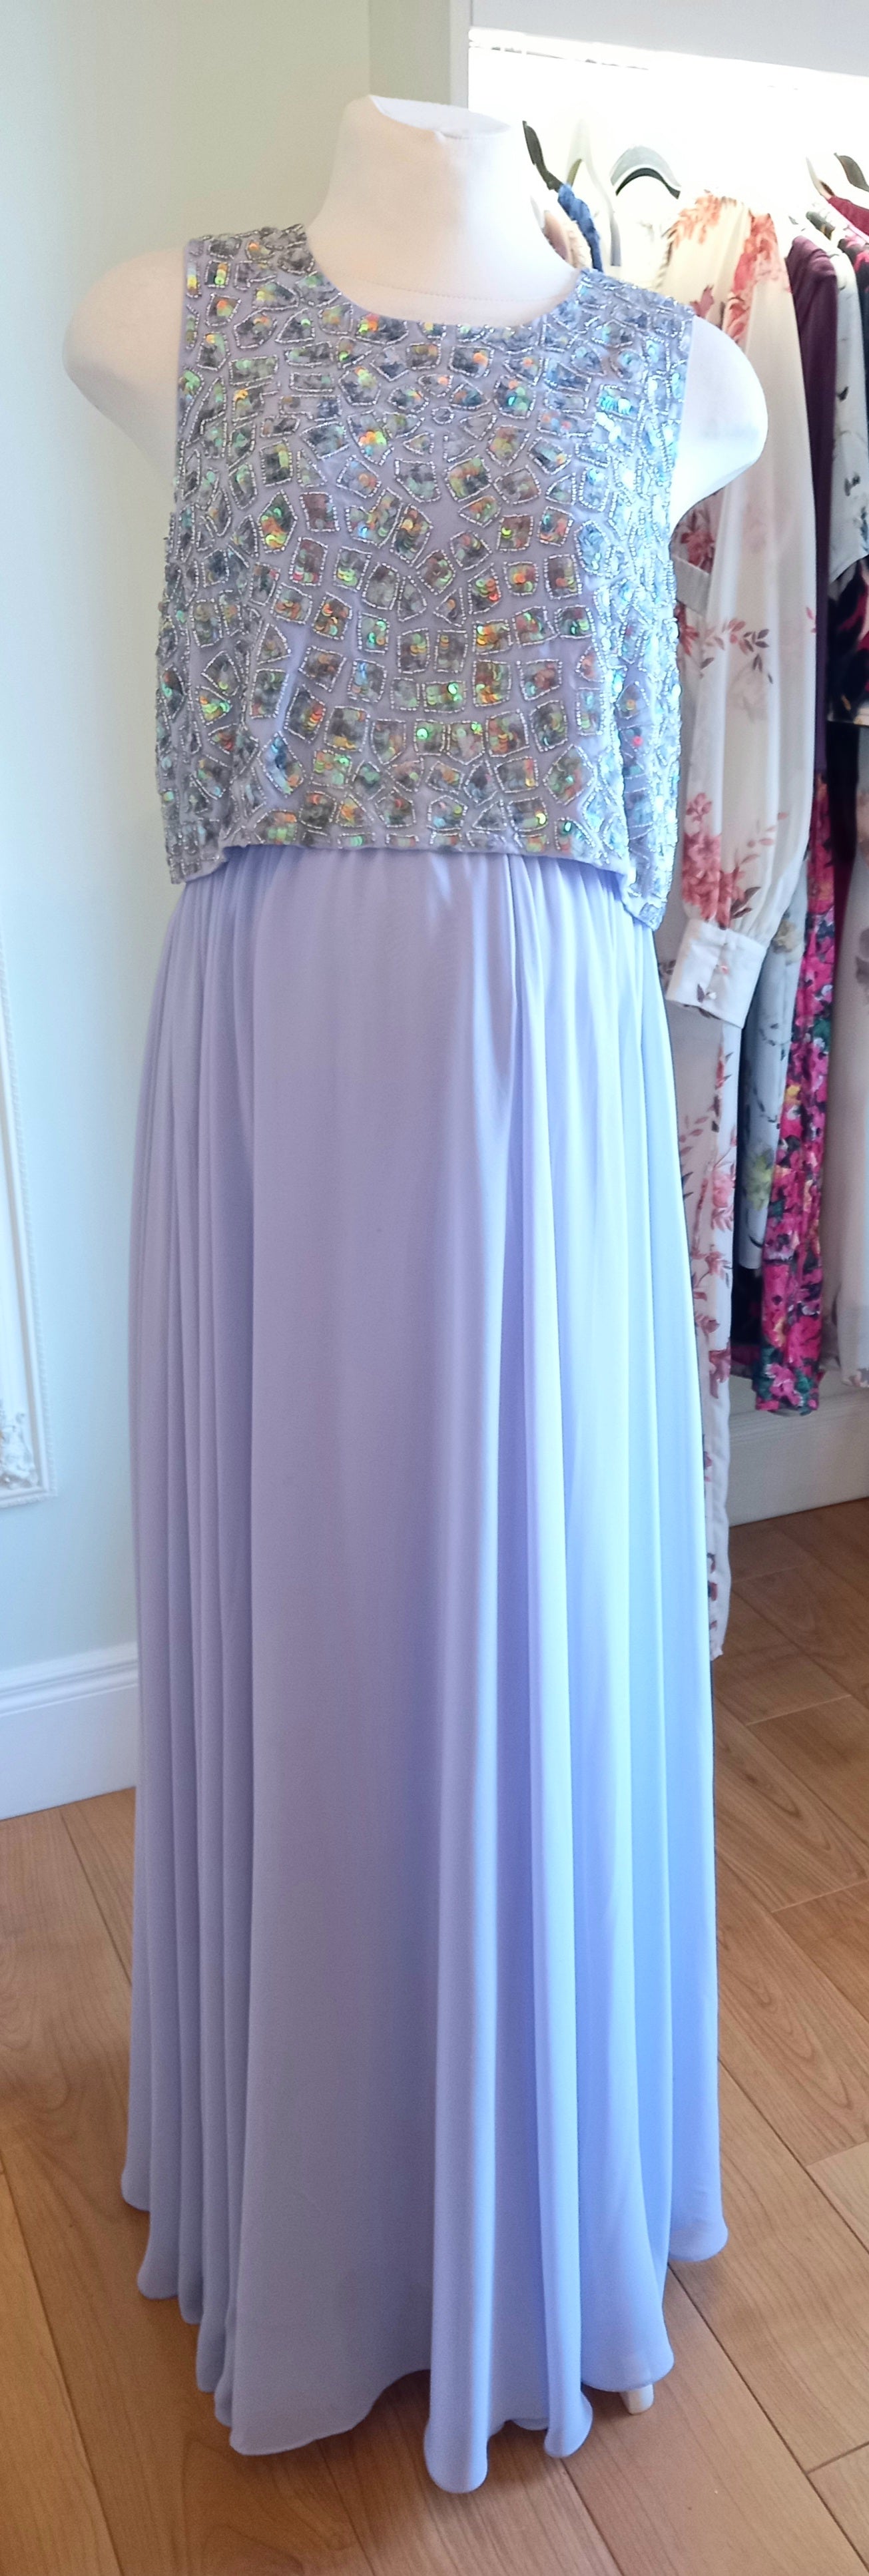 Asos Maternity Lilac Maxi Occasion Dress With Top Half Sequins - Size 14